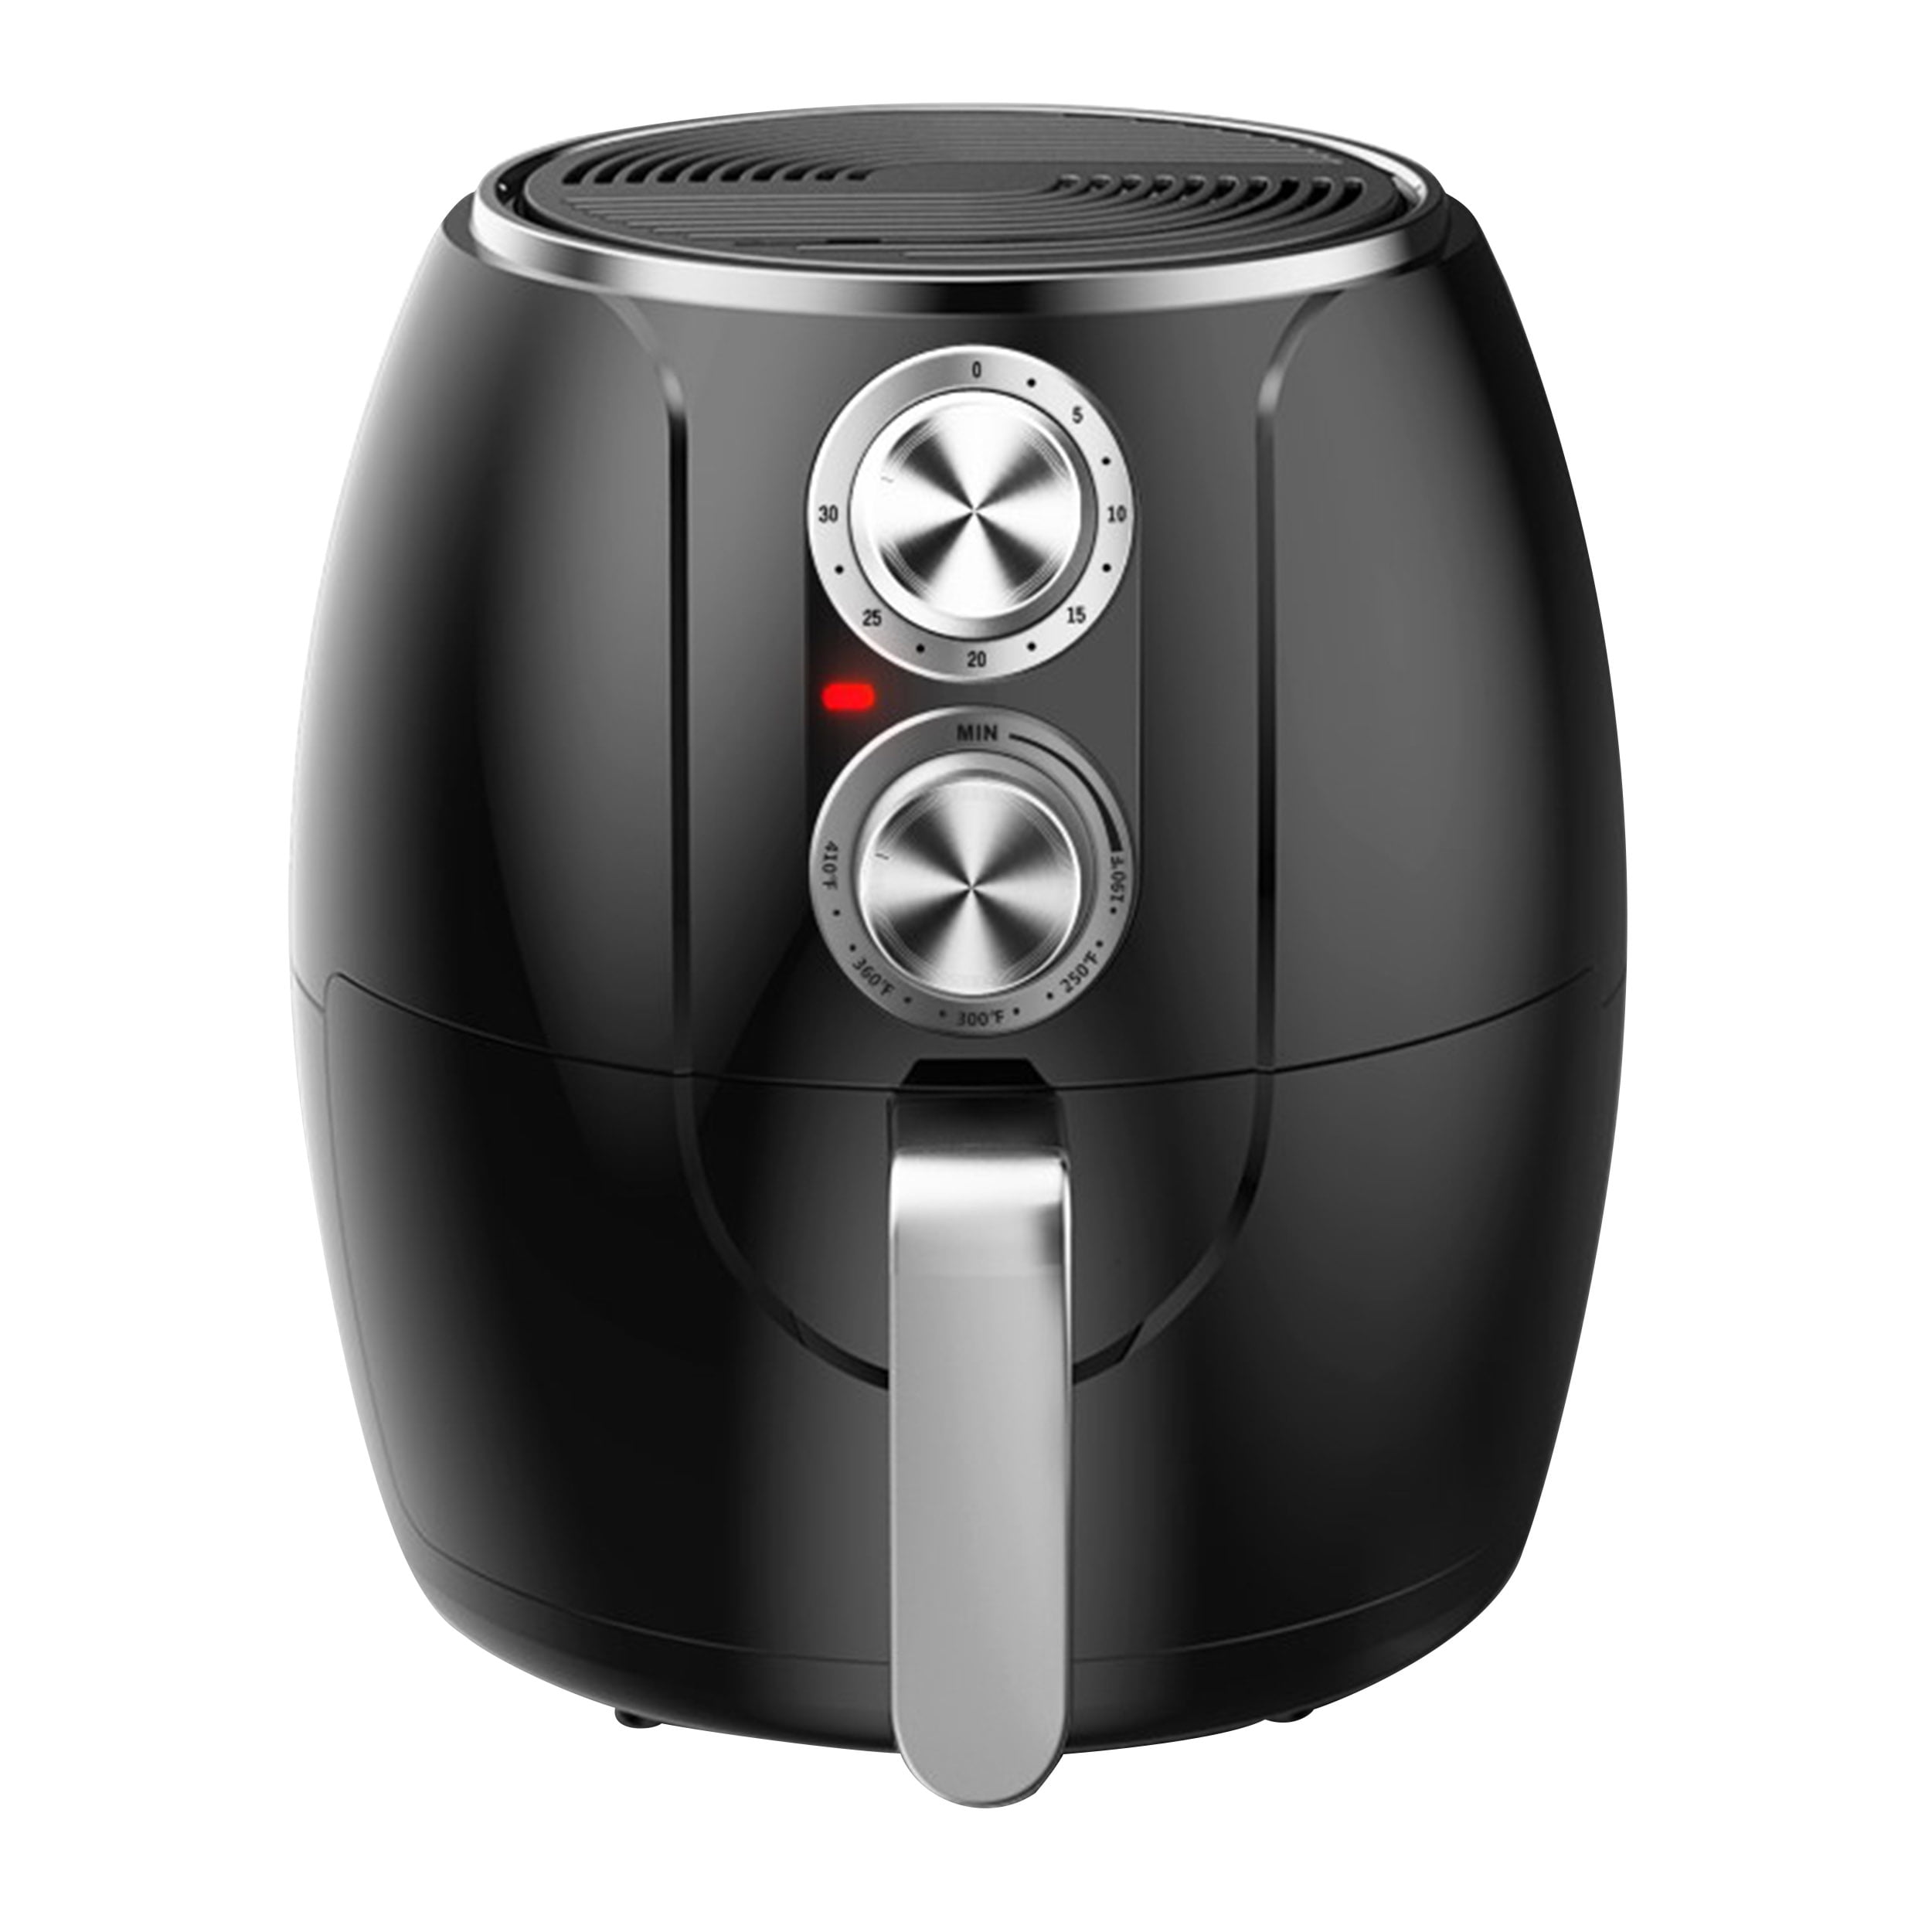 Emerald Electric Air Fryer with LED Touch Display- 5.2L Capacity (1804)